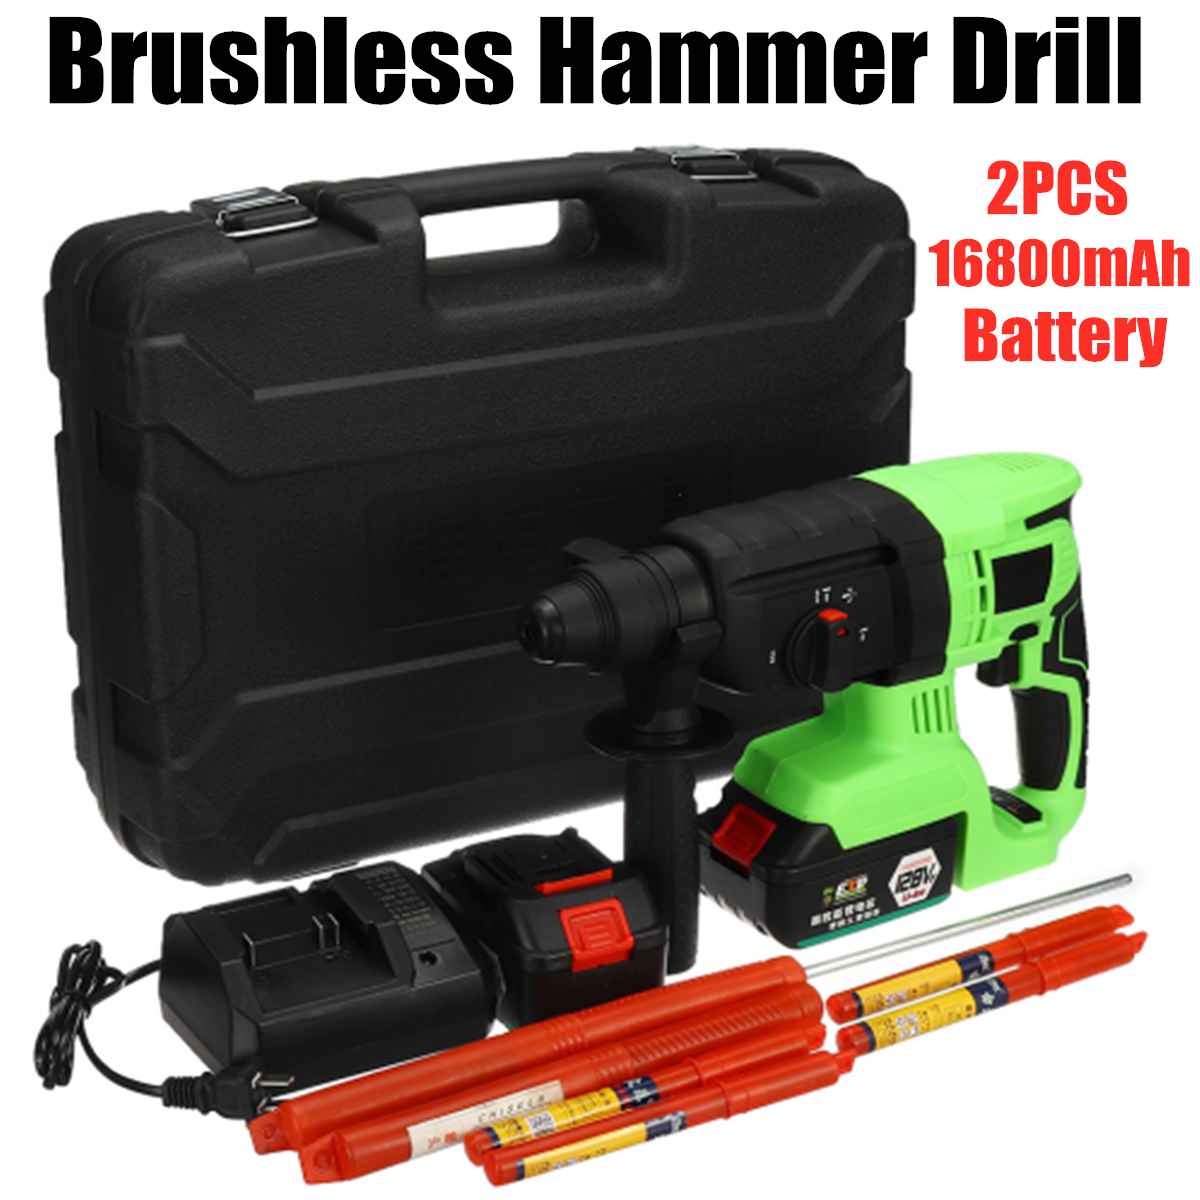 128VF-16800mAh-Brushless-Electric-Cordless-Impact-Hammer-High-Torque-Drill-with-Rechargeable-Battery-1522123-2